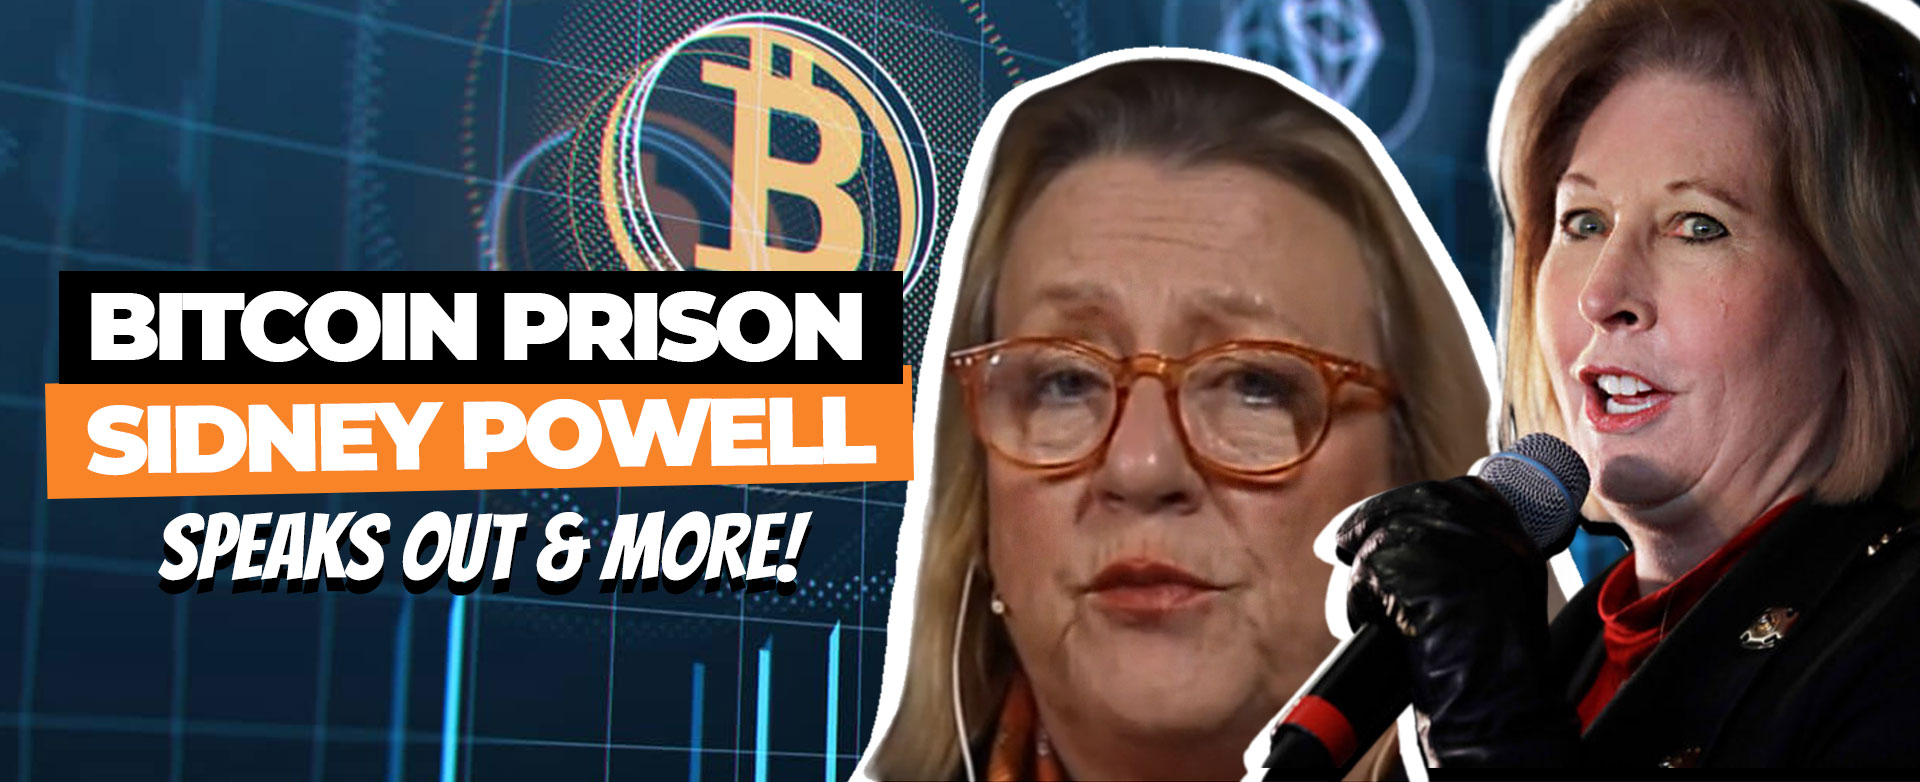 MyPatriotsNetwork-Bitcoin Prison, Sidney Powell Speaks Out & More – February 23, 2021 Update